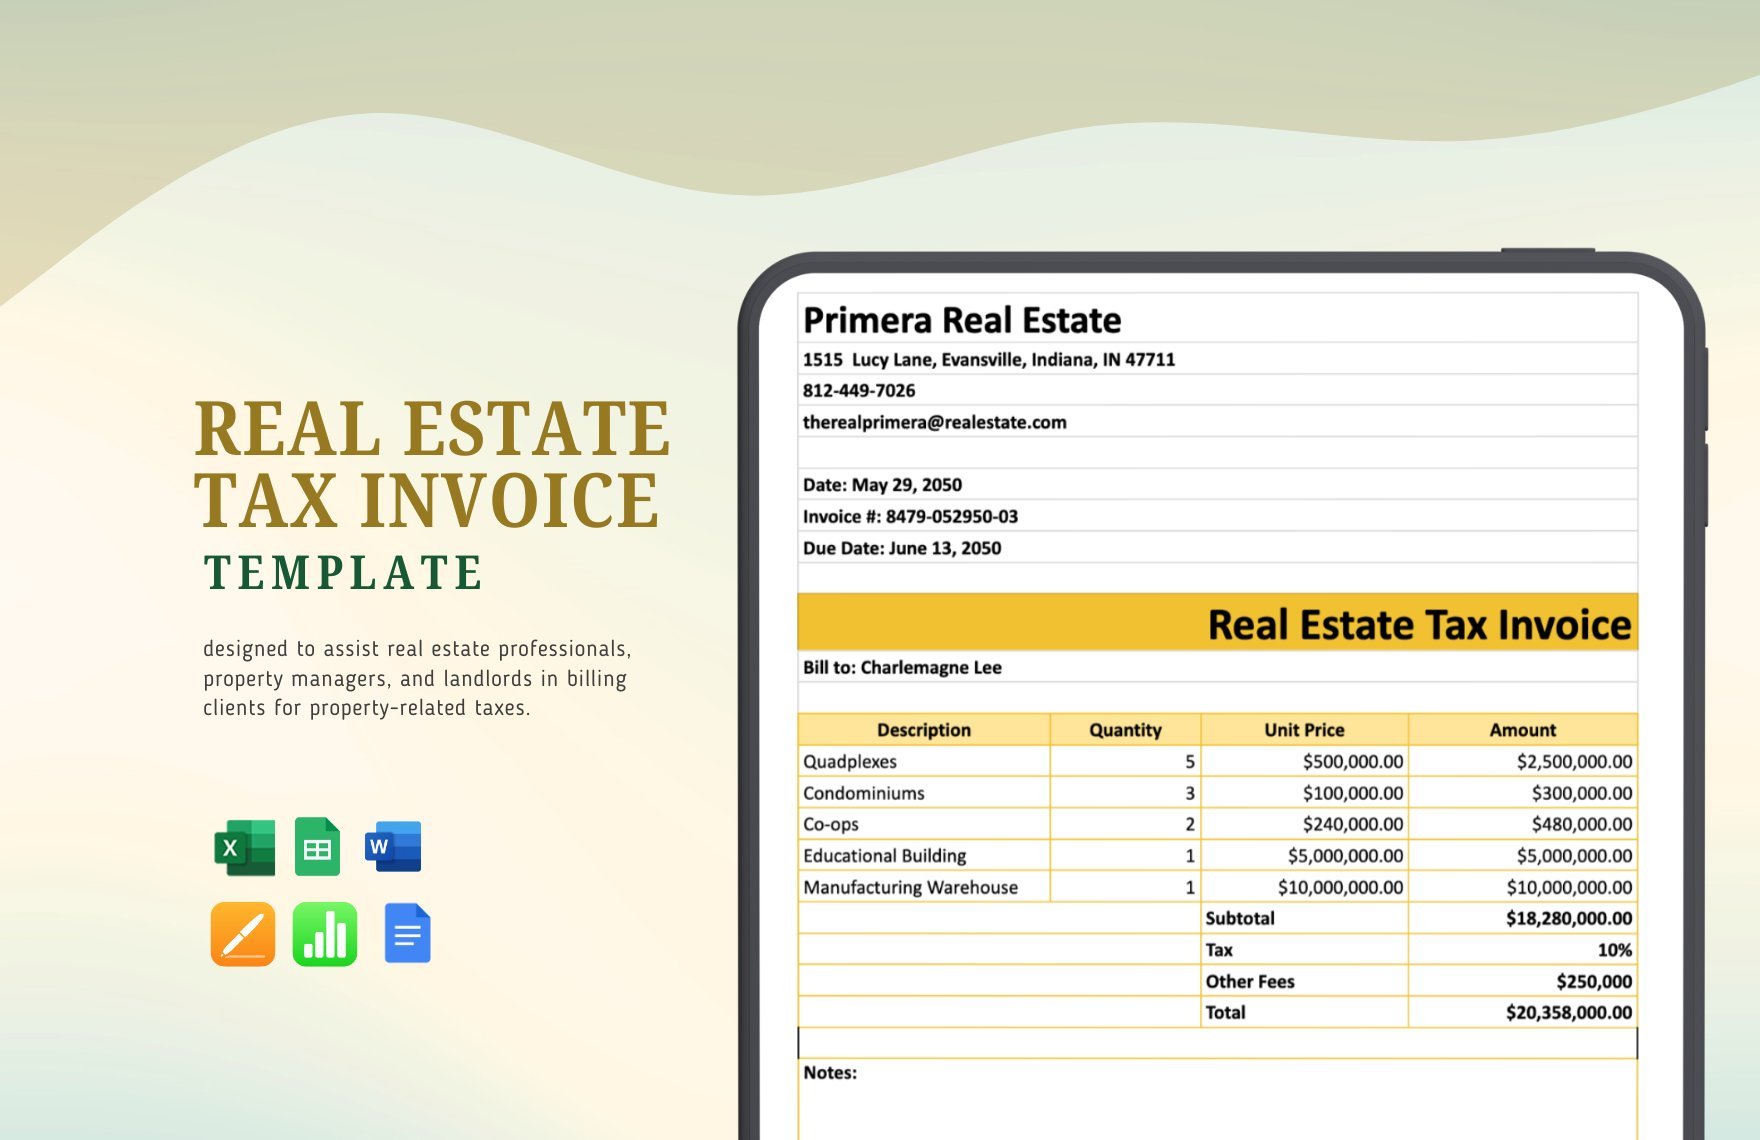 Real Estate Tax Invoice Template in Word, Google Docs, Excel, Google Sheets, Apple Pages, Apple Numbers